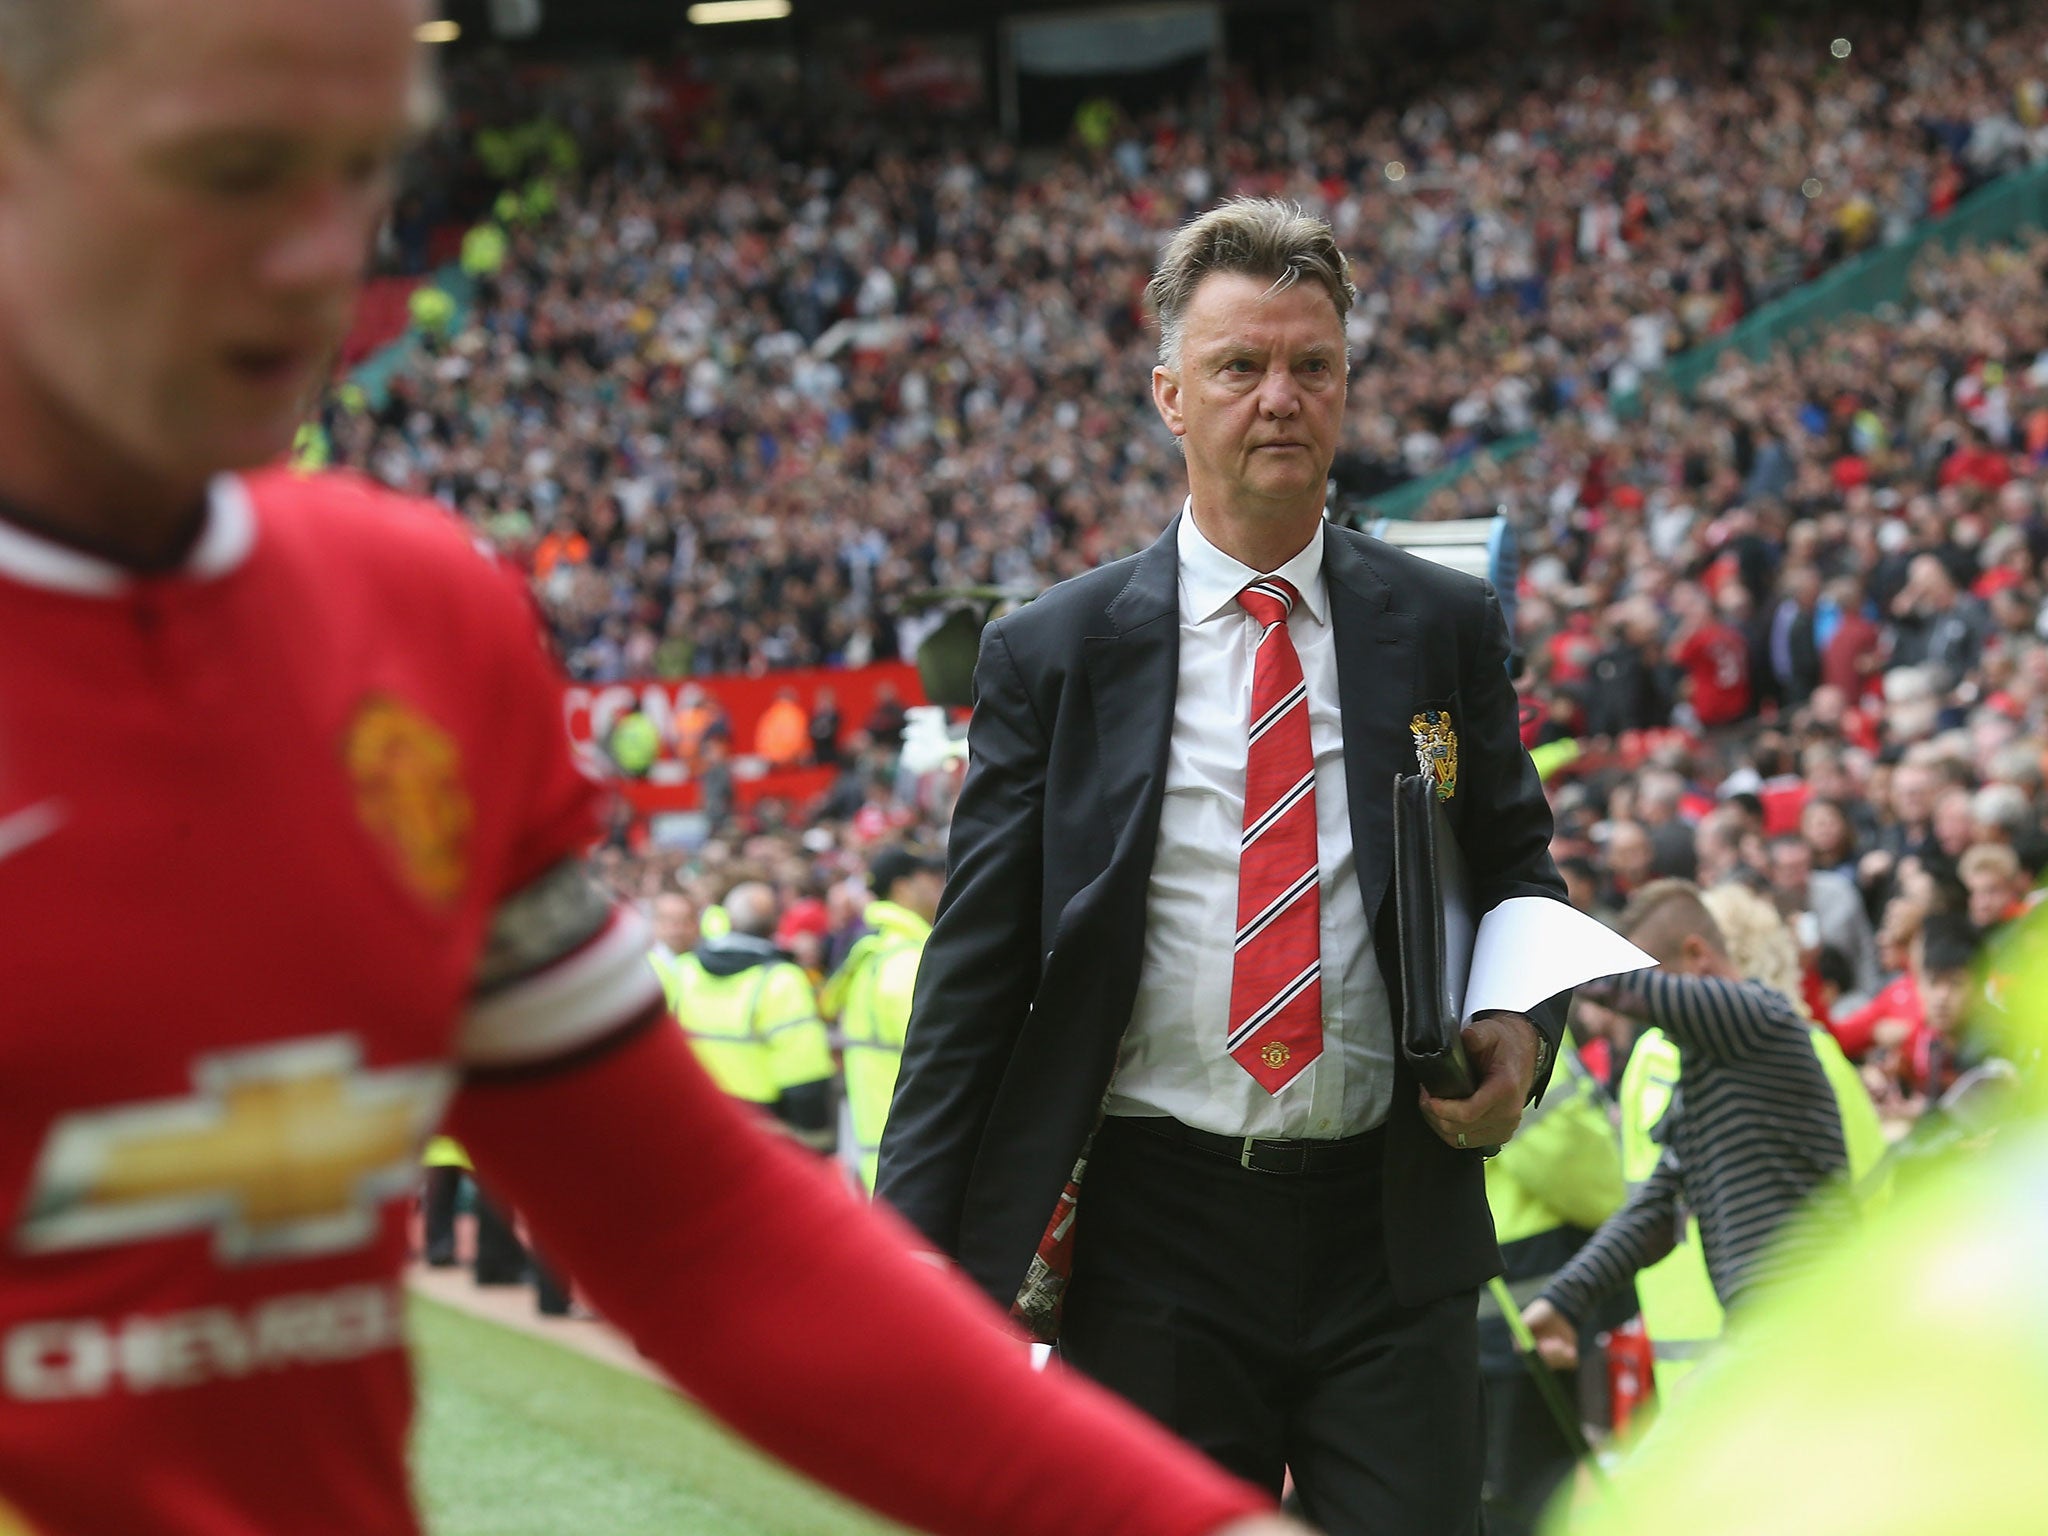 Louis van Gaal was disappointed with Manchester United's performance against Swansea